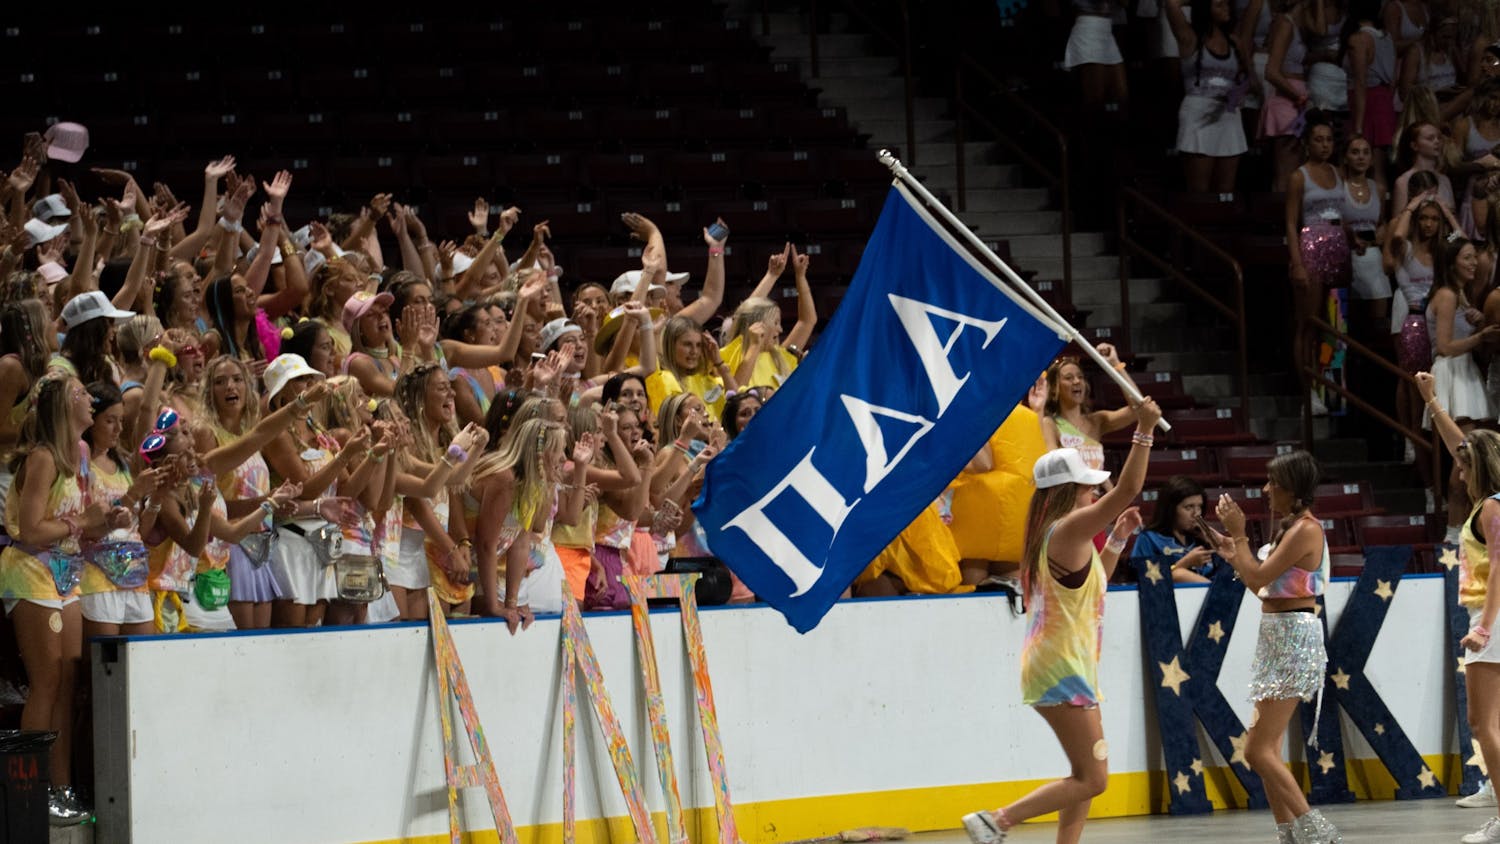 USC Sororities gathered Sunday afternoon, Aug. 21, 2022 at the Colonial Life Arena for Bid Day. Several chapters took part in the event welcoming new faces to the USC Greek community.